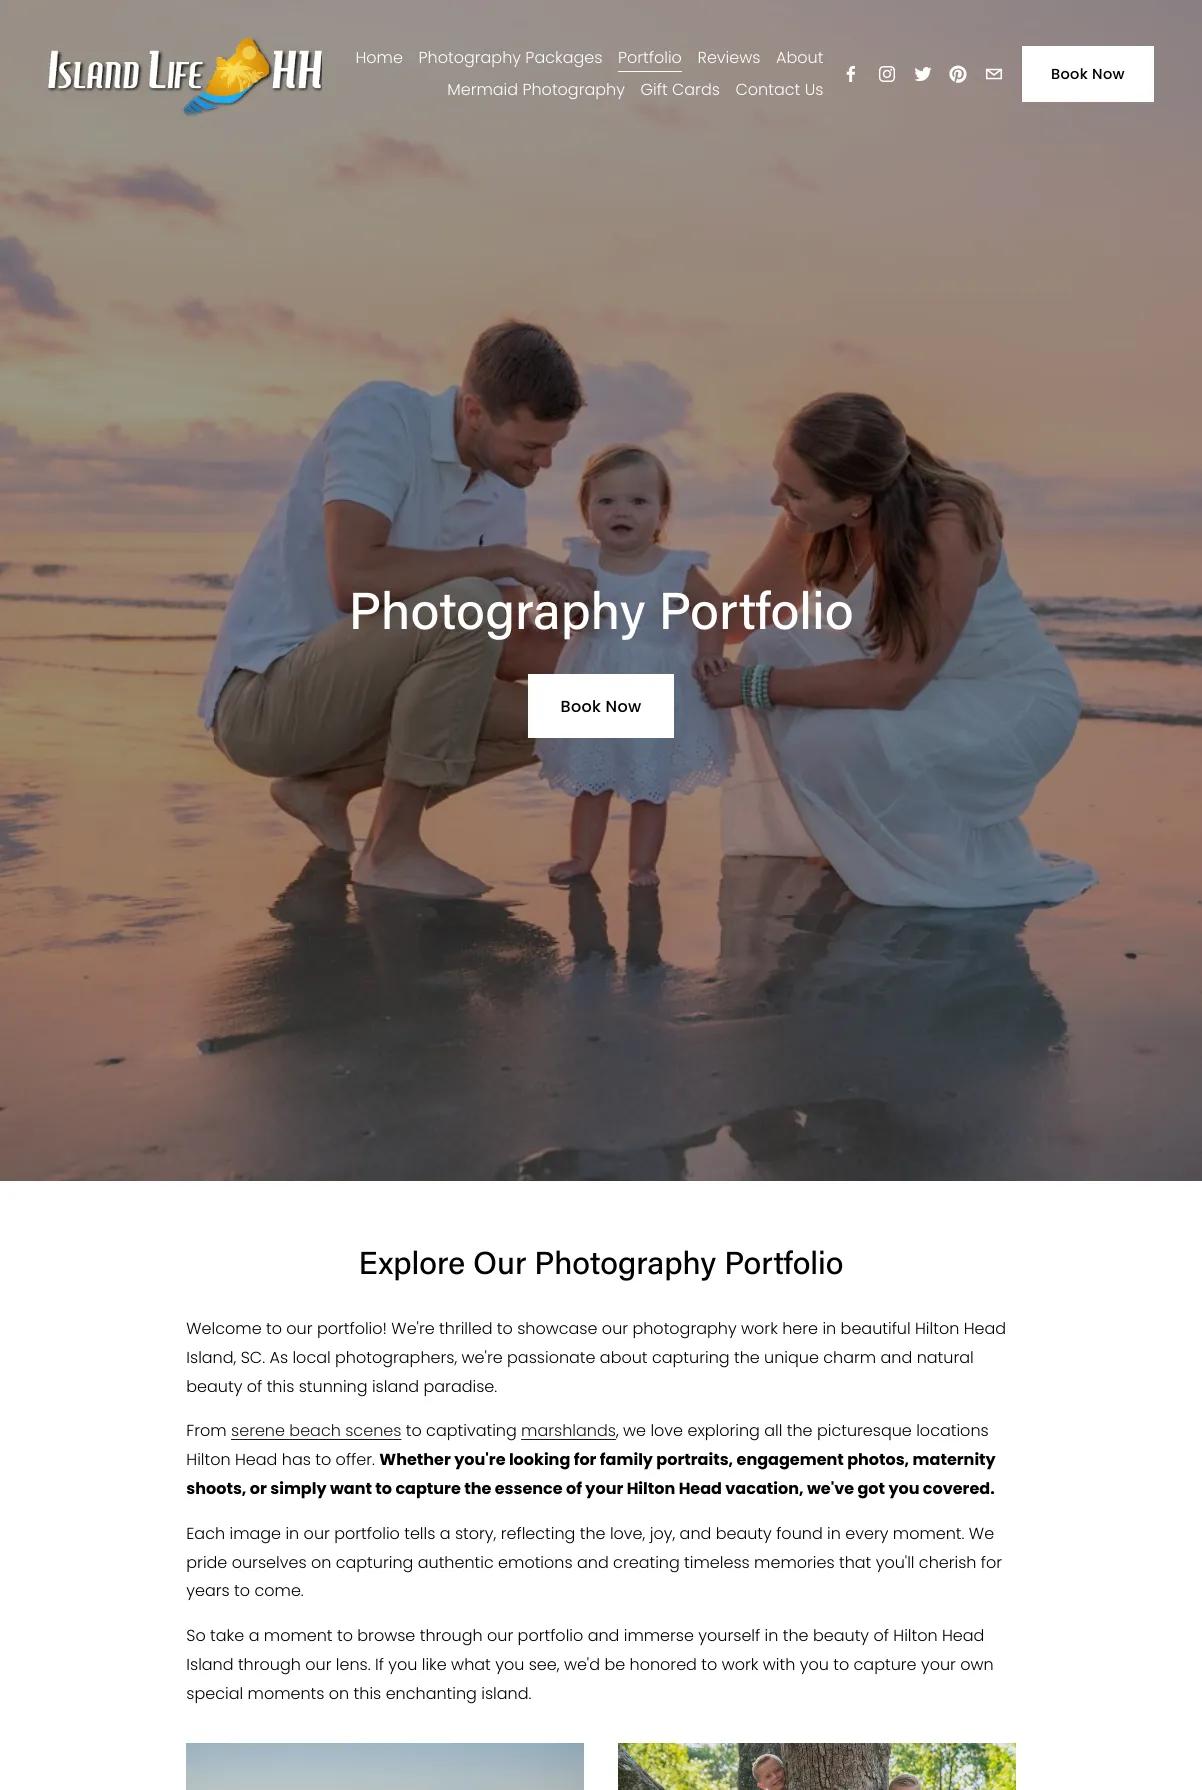 Screenshot 3 of Island Life HH Photography (Example Squarespace Photography Website)